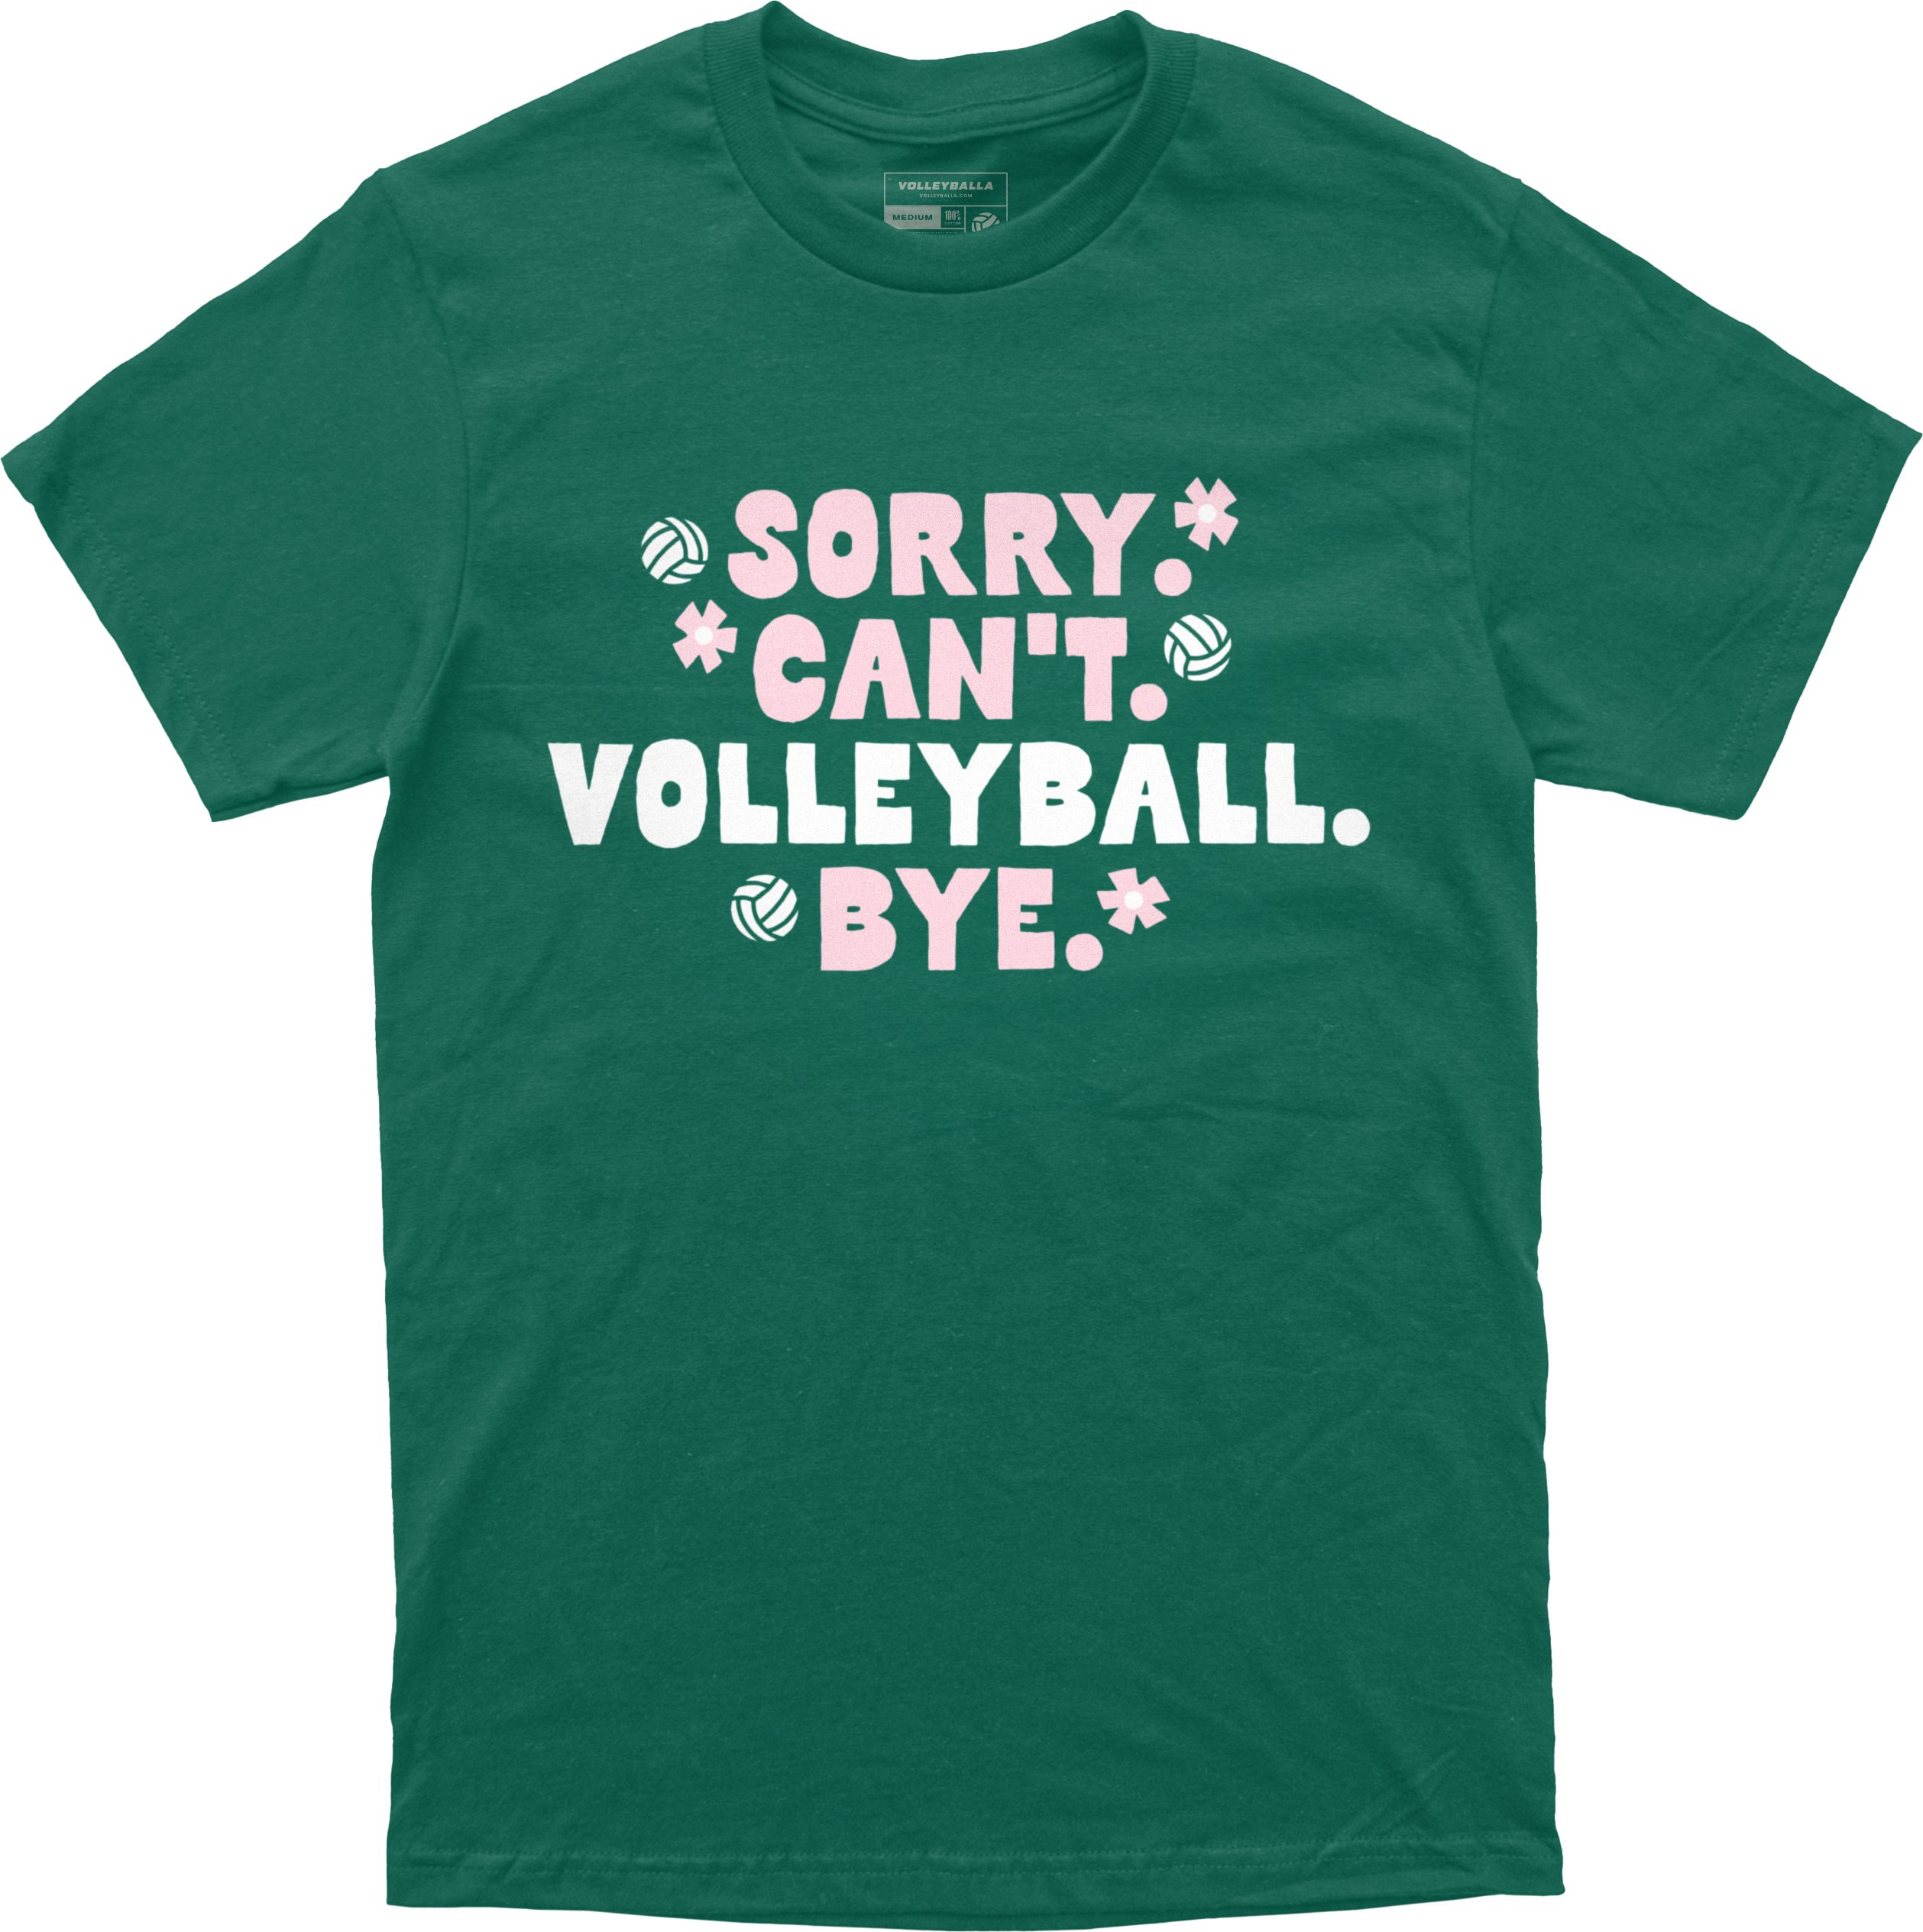 Sorry. Can't. Volleyball. Bye. Tee